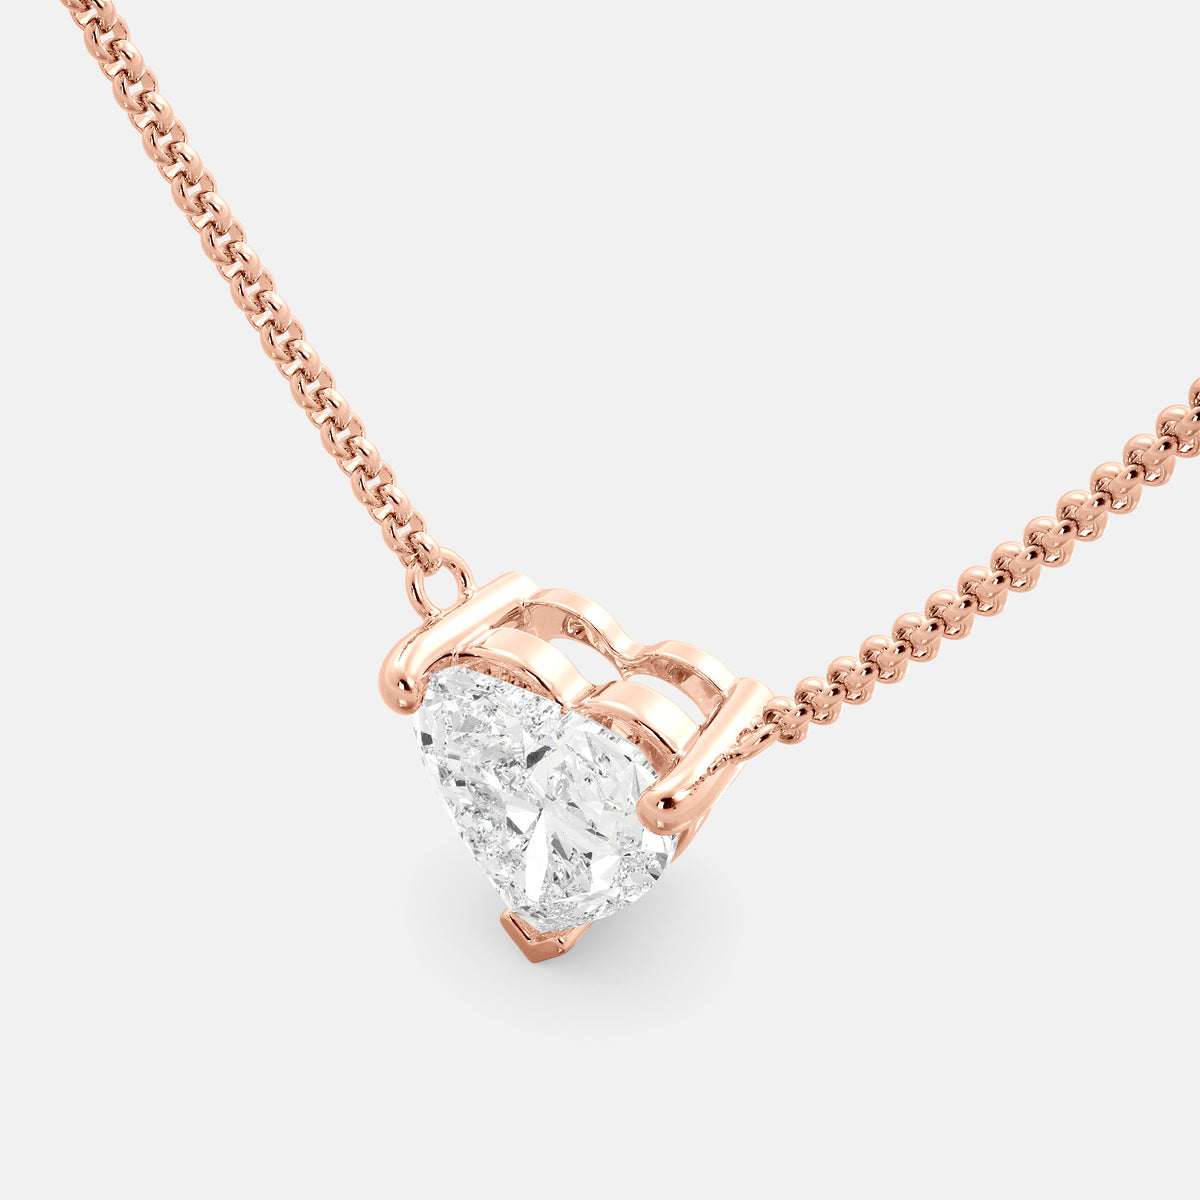 A close-up of a heart-shaped diamond necklace in recycled rose gold. The necklace is set with a single heart-shaped diamond in the center of a pendant. The necklace is made of recycled rose gold and has a simple, elegant design. The diamond is sparkling and reflects light beautifully. The necklace is a perfect gift for a loved one or a special occasion.